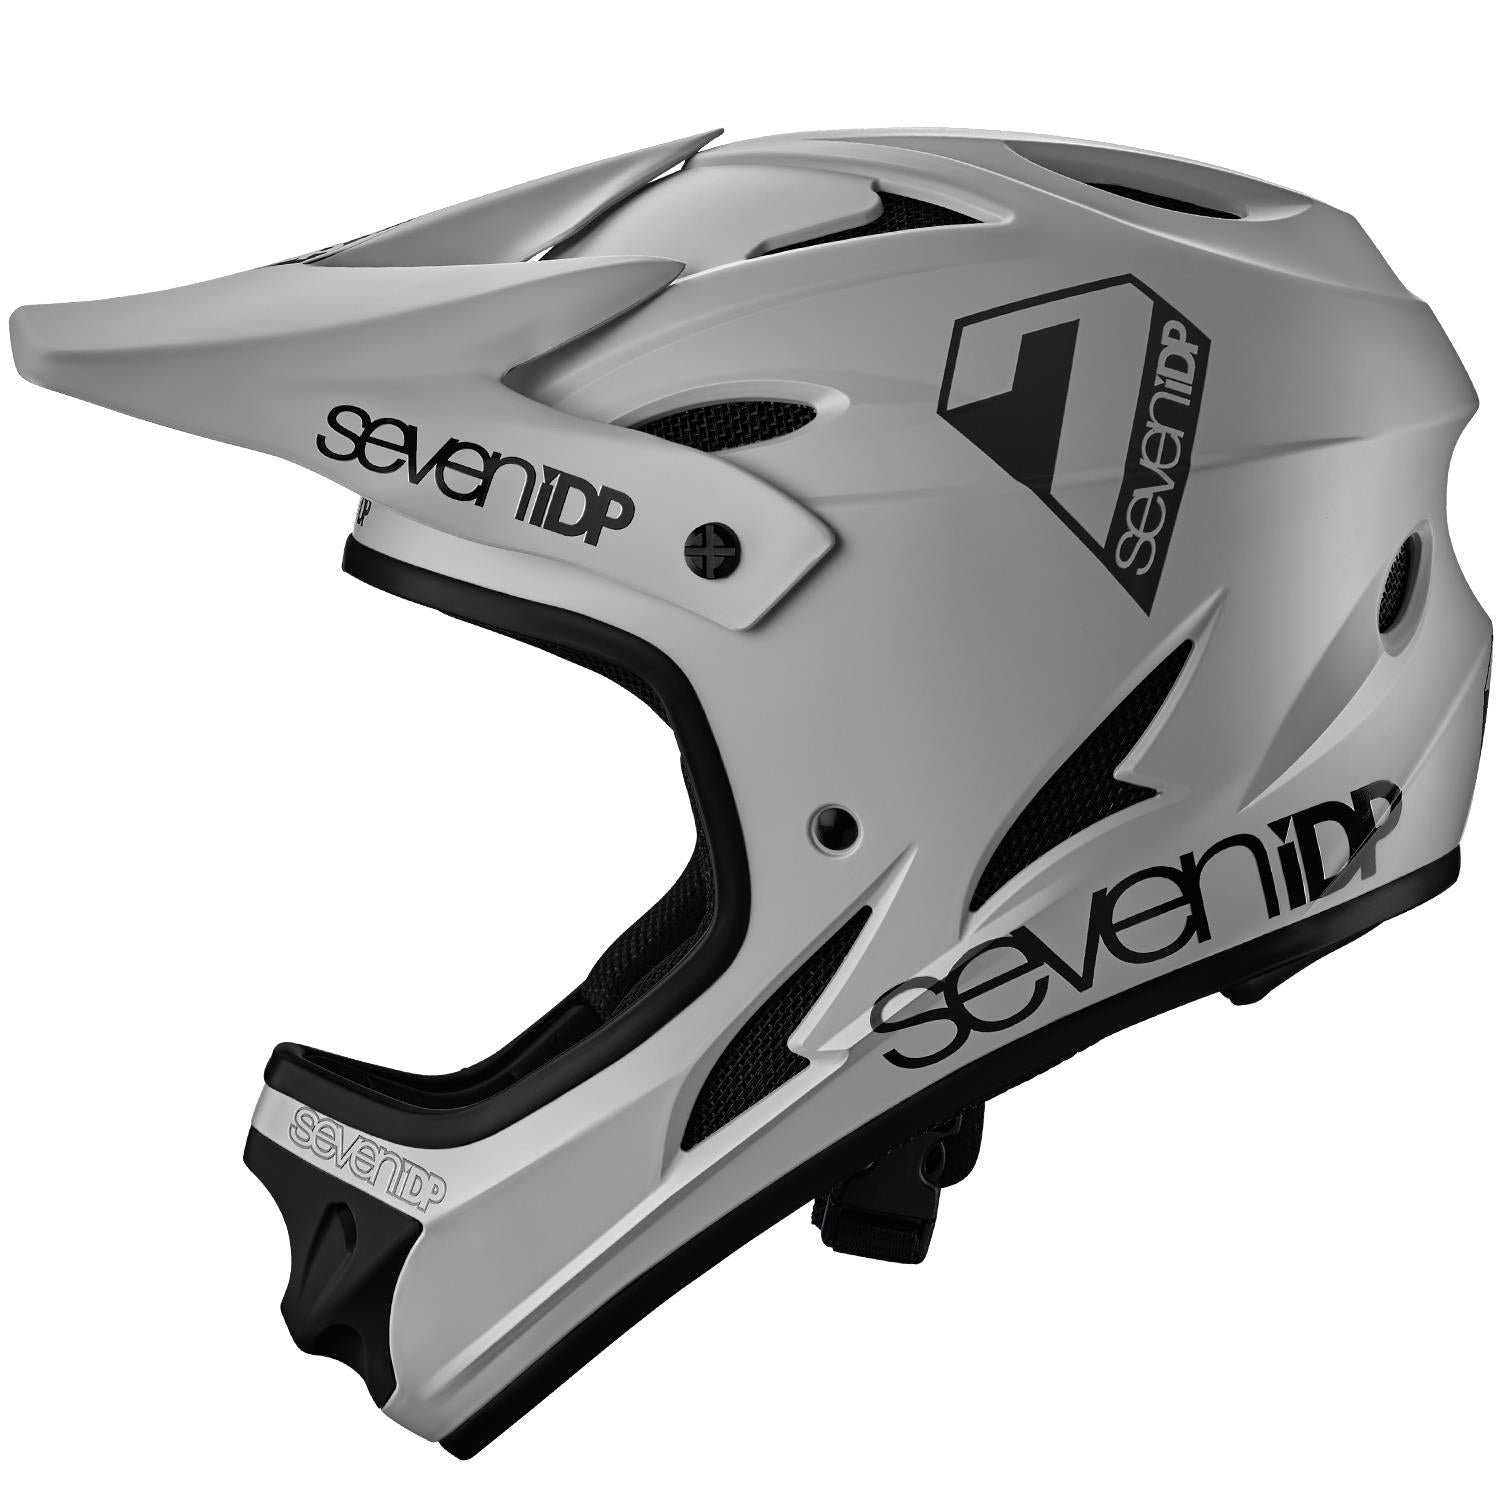 Seven iDP M1 Youth Race Casque - Grey